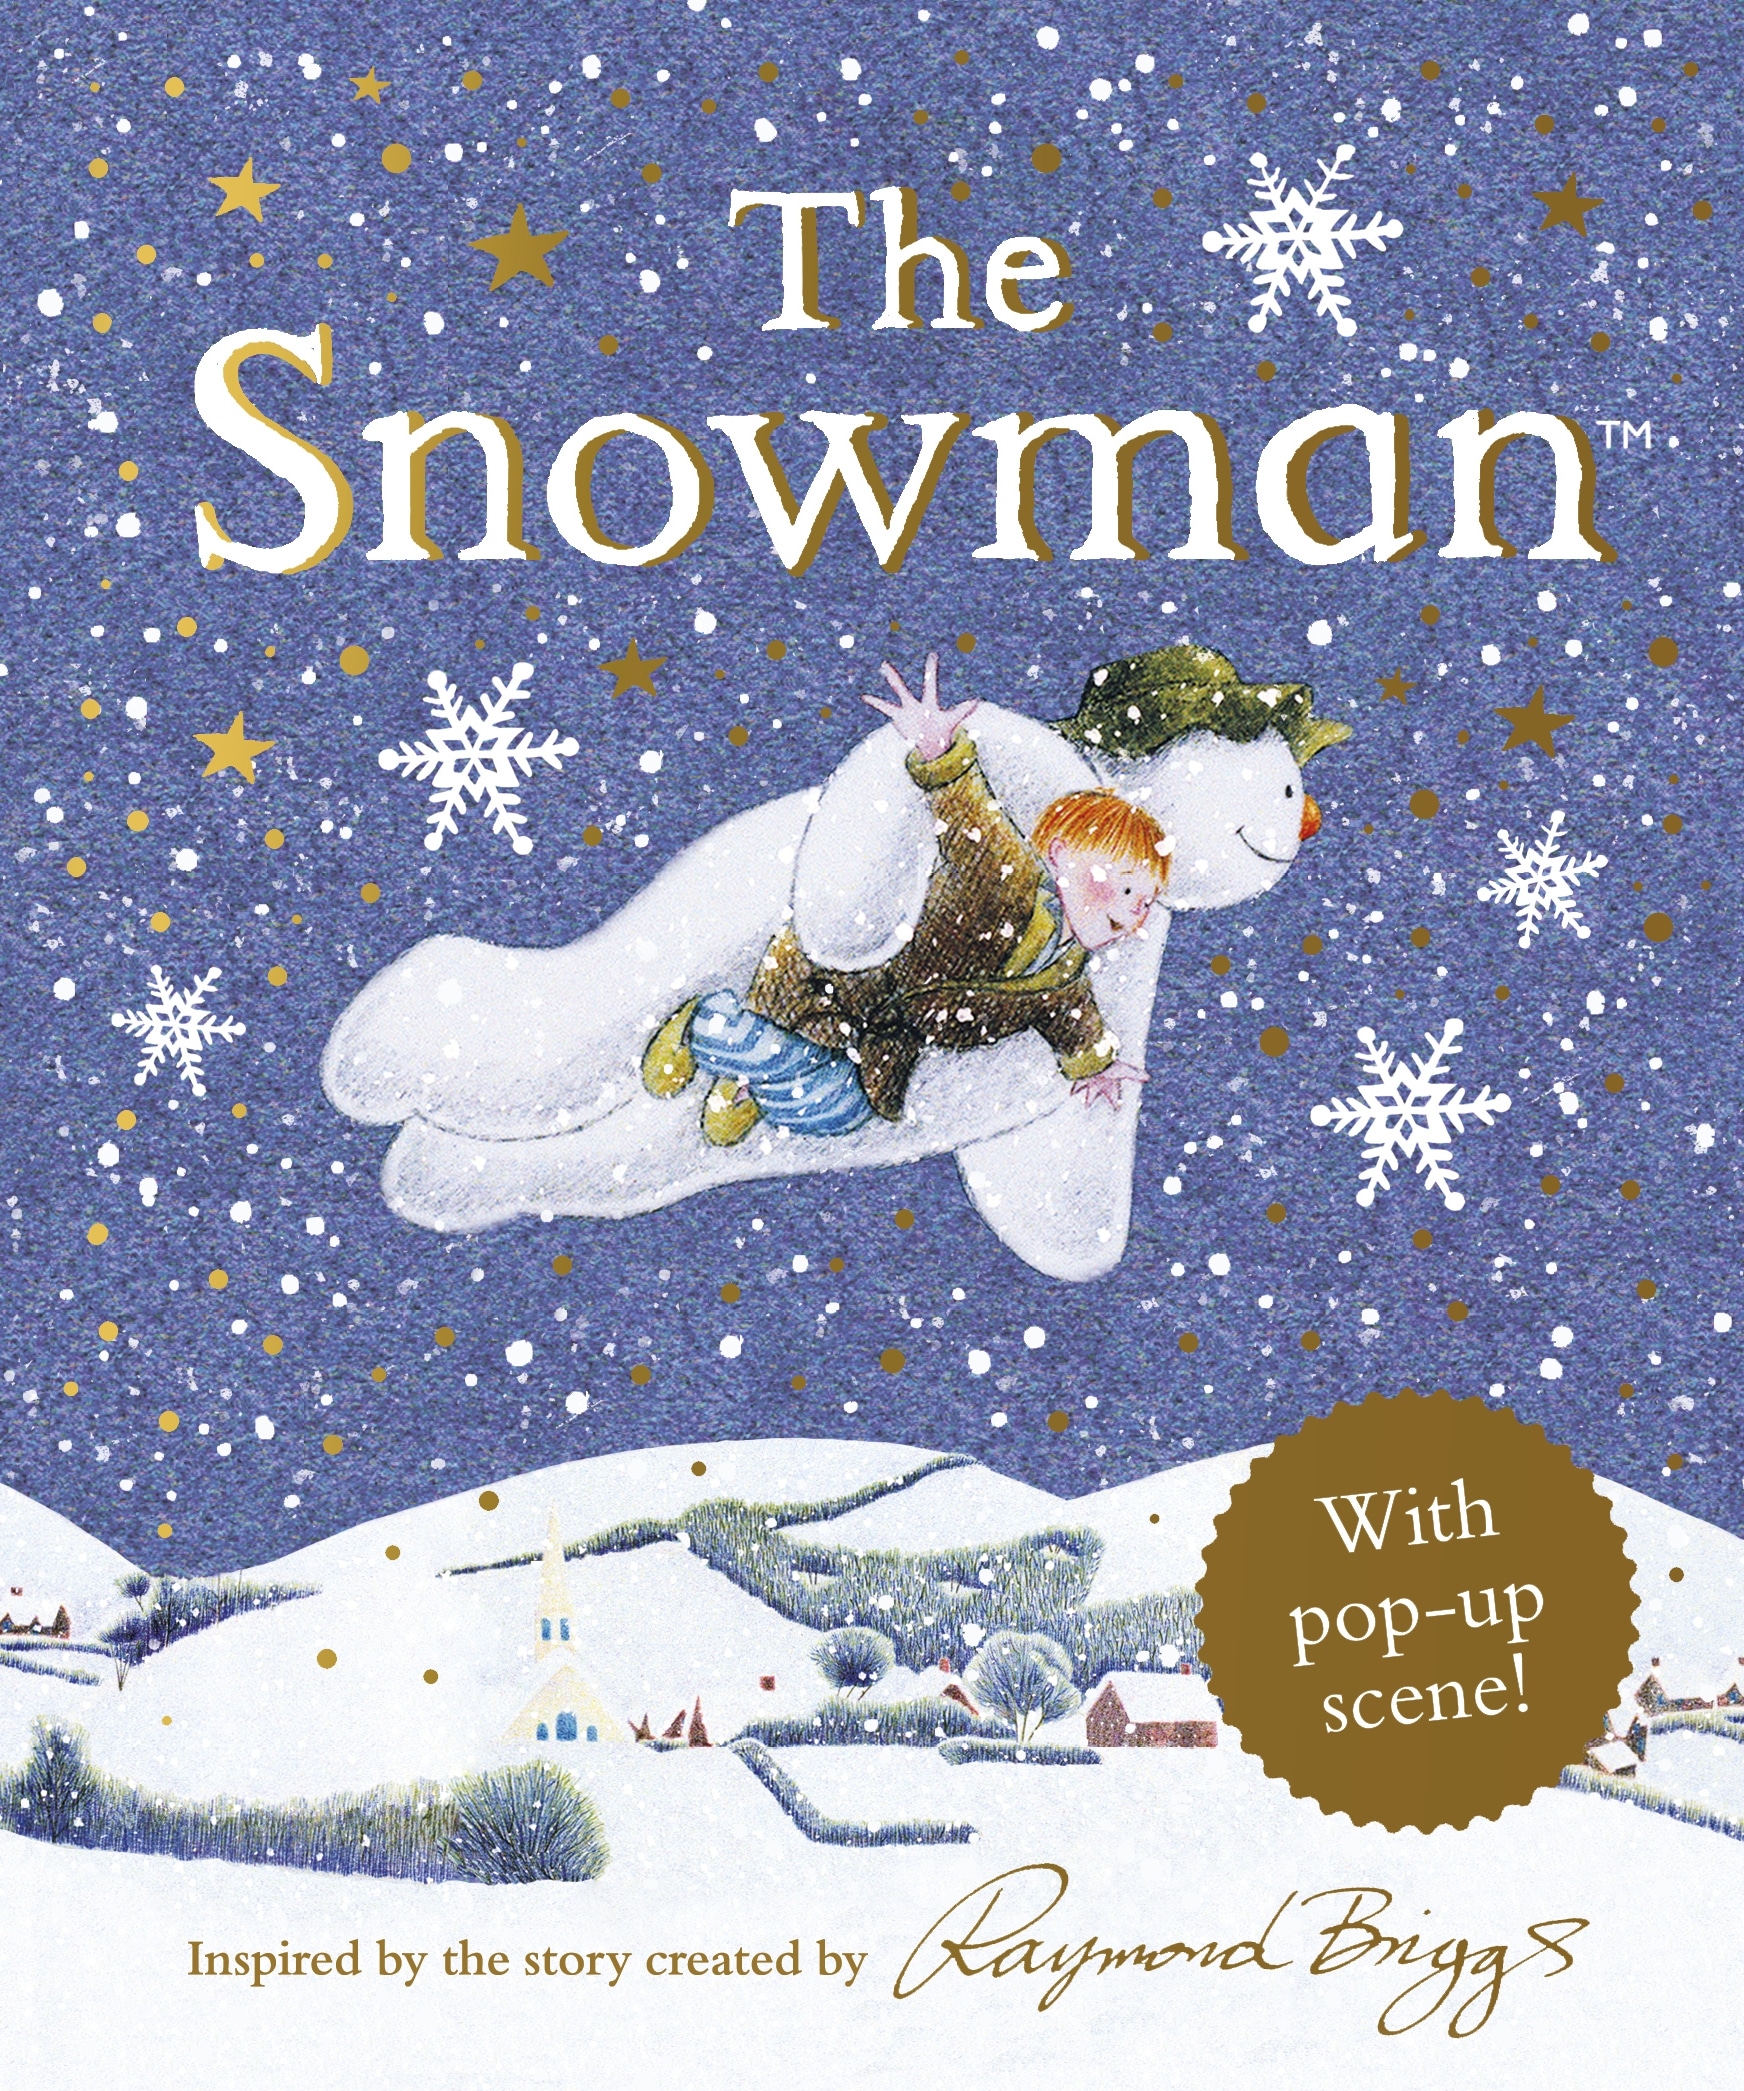 Book “The Snowman Pop-Up” by Raymond Briggs — October 3, 2019